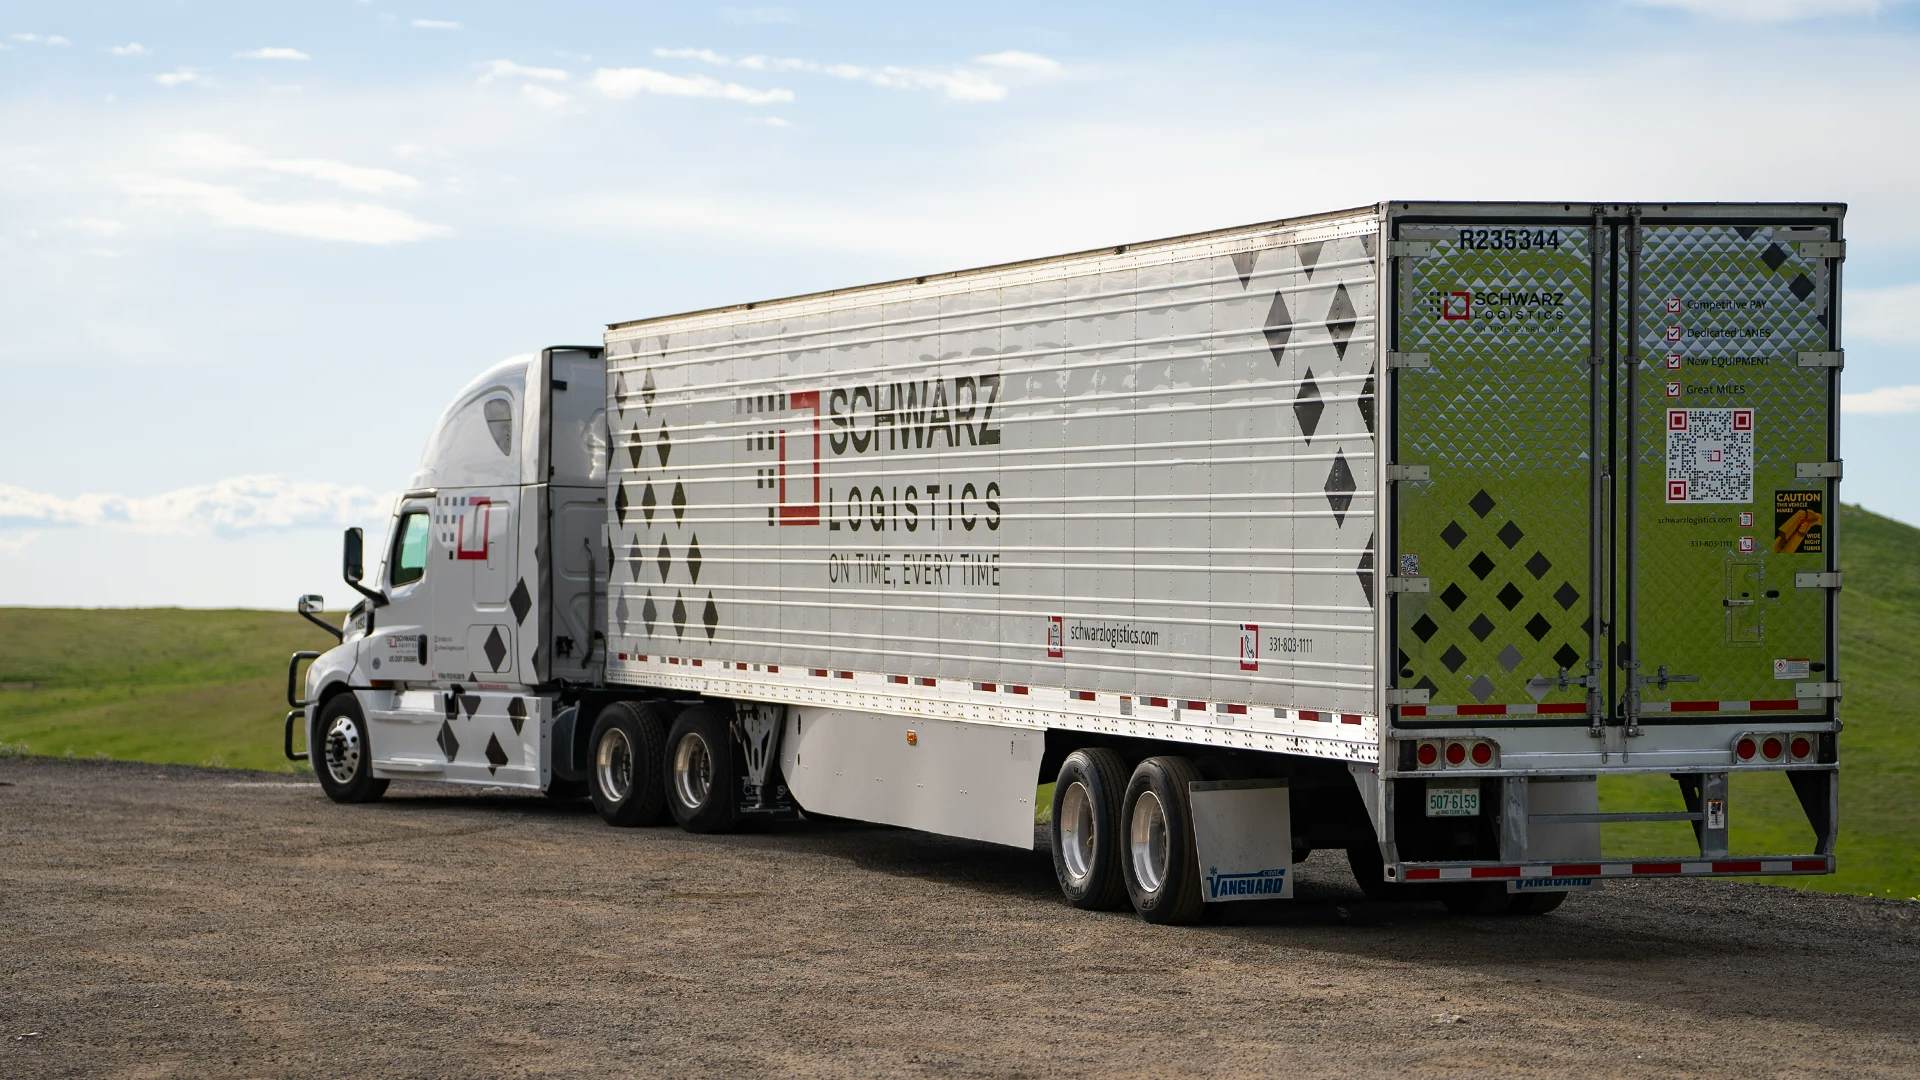 A semi-trailer truck parked on a gravel lot with a countryside landscape in the background.